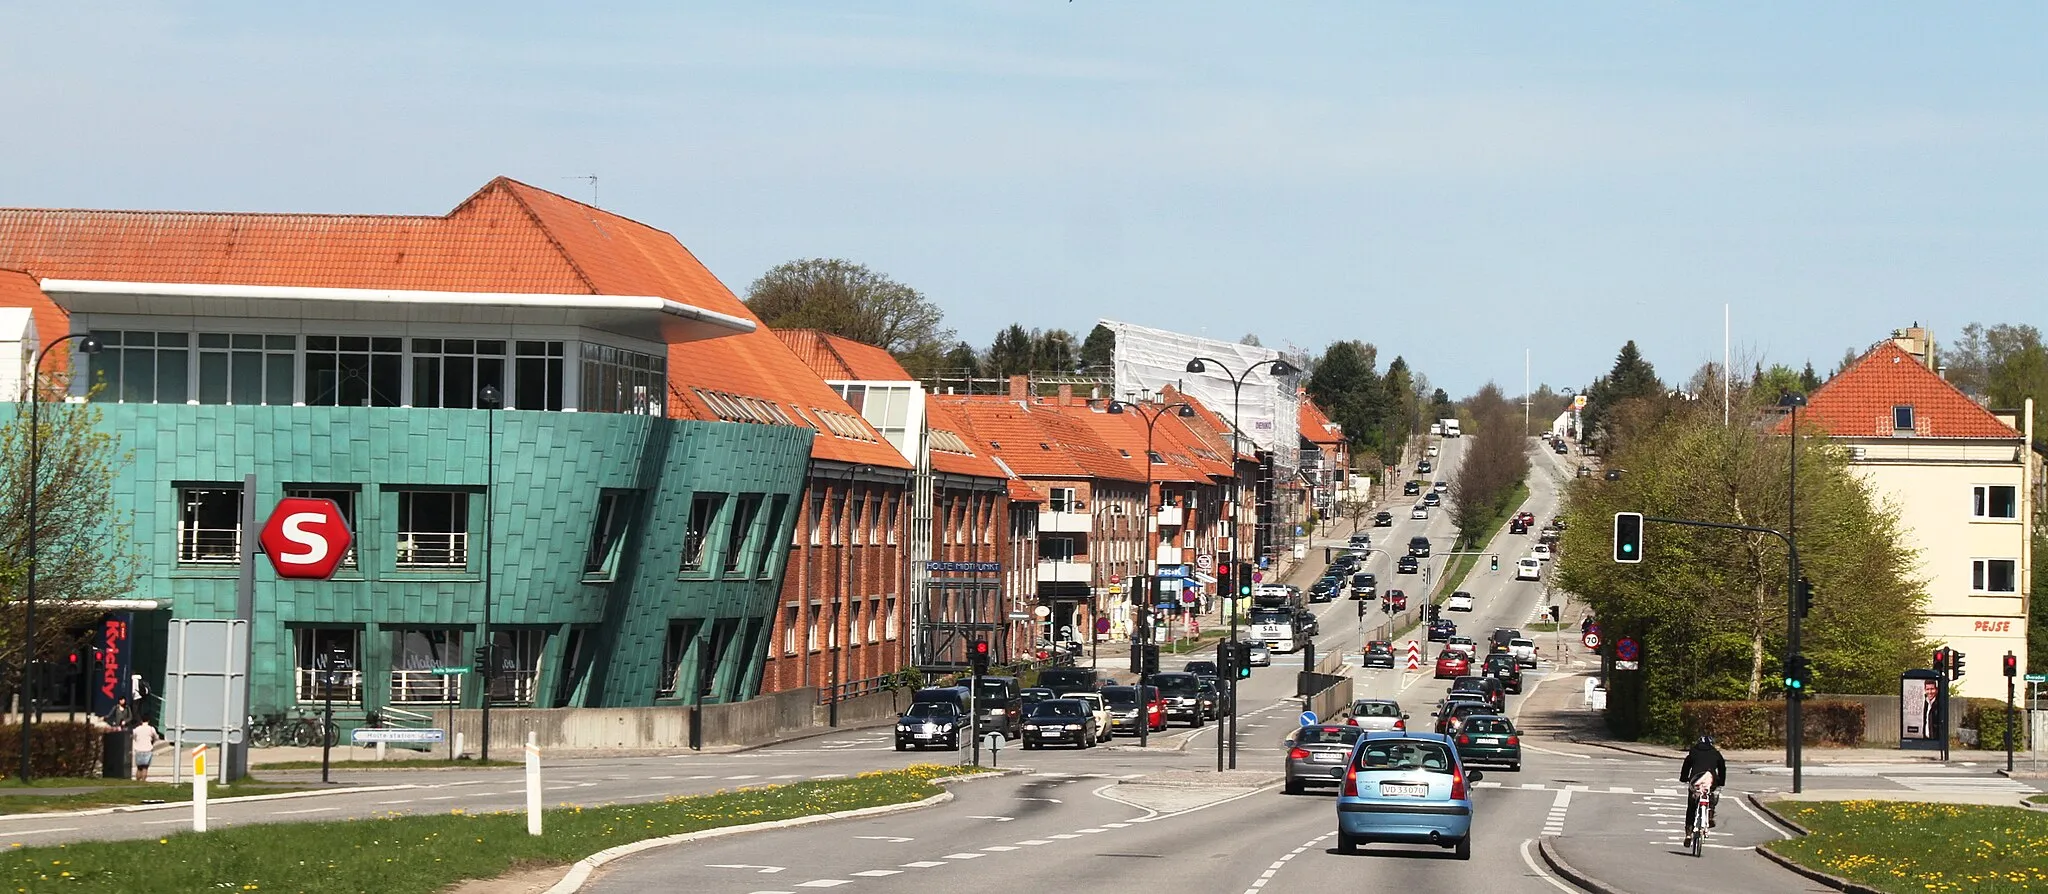 Photo showing: Image from the municipality of Rudersdal, northern Zealand (Sjælland) - Denmark. This is the village of Holte.